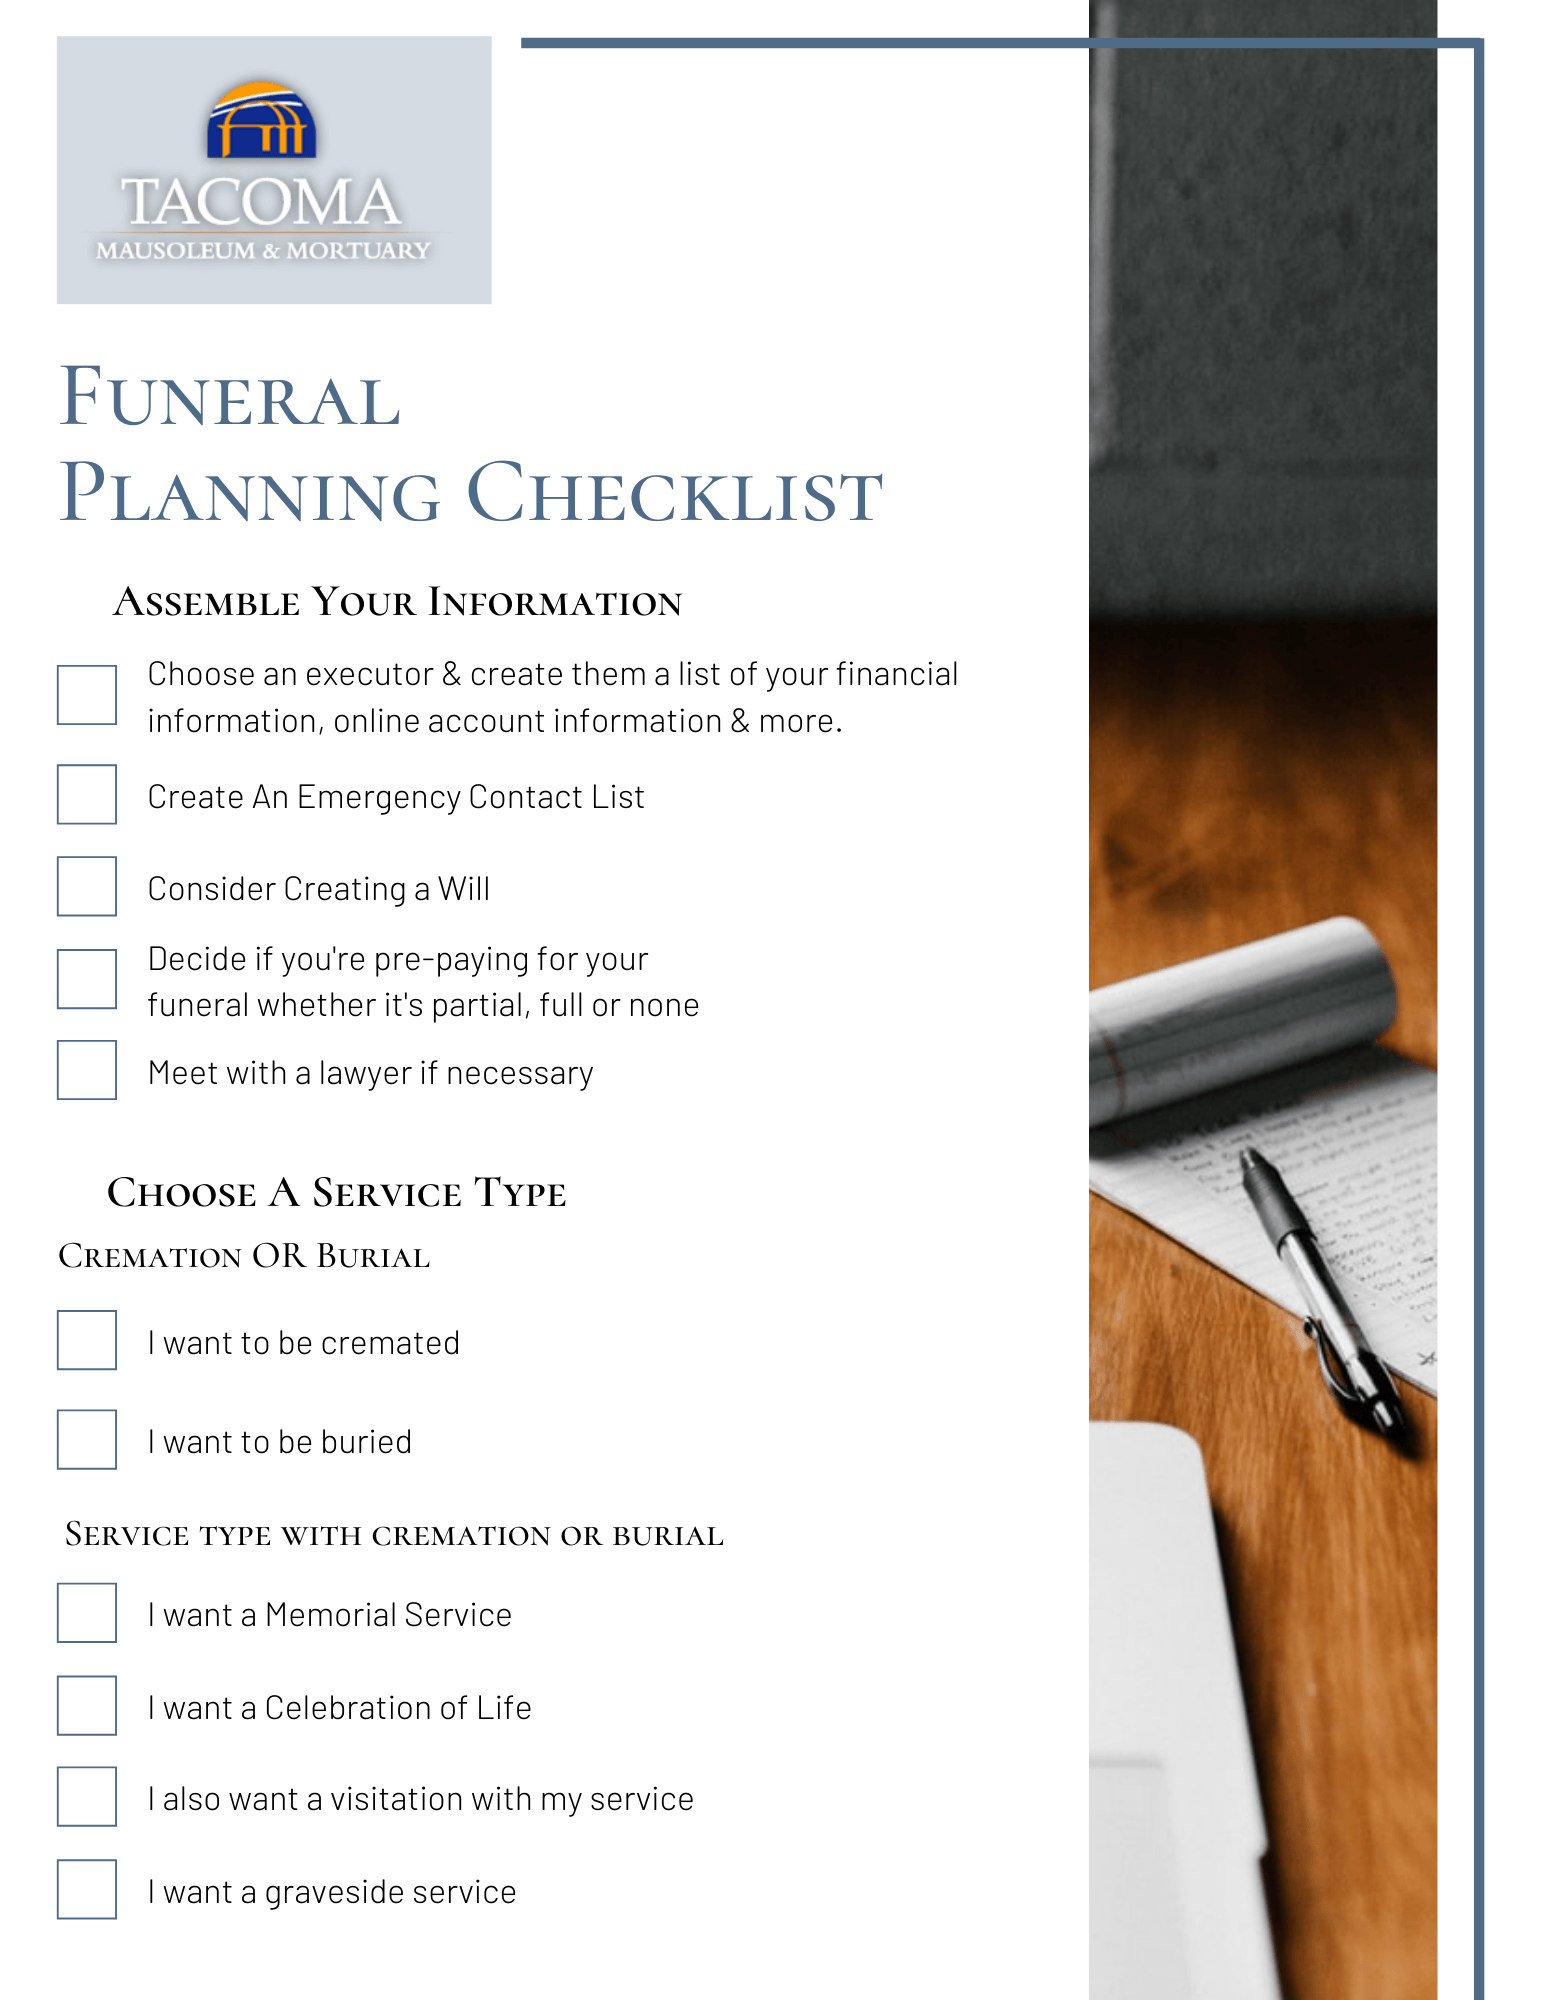 How to Pre-Plan Your Funeral Checklist